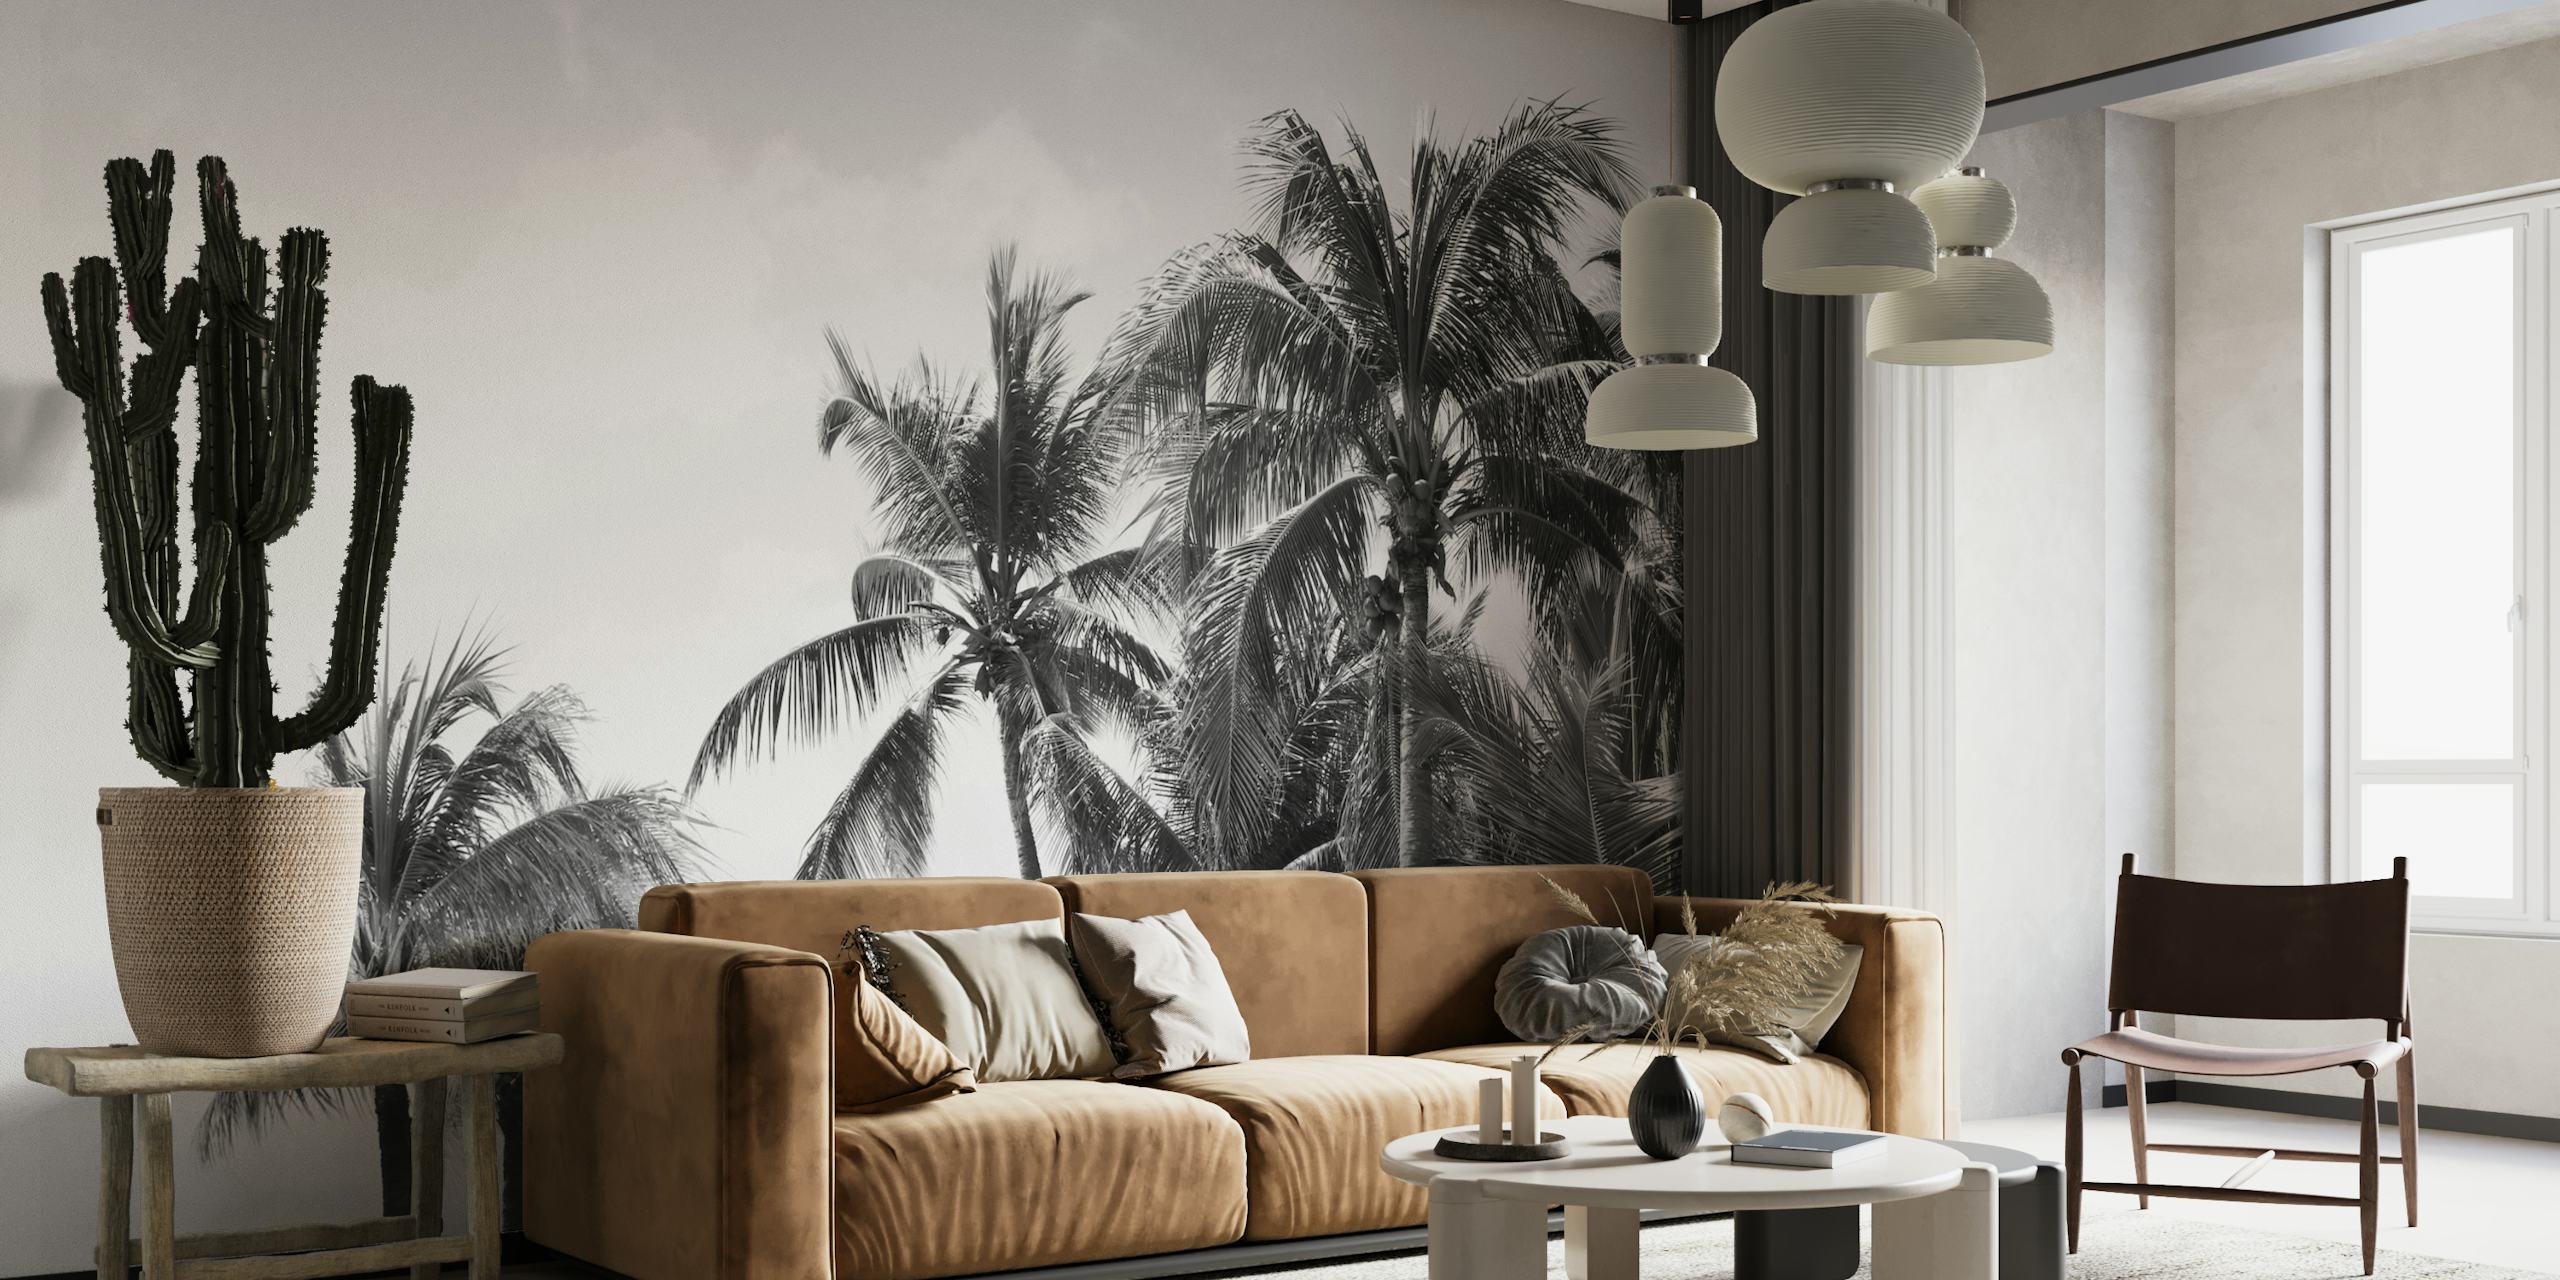 Black-and-white wall mural depicting palm trees against a calm beach backdrop